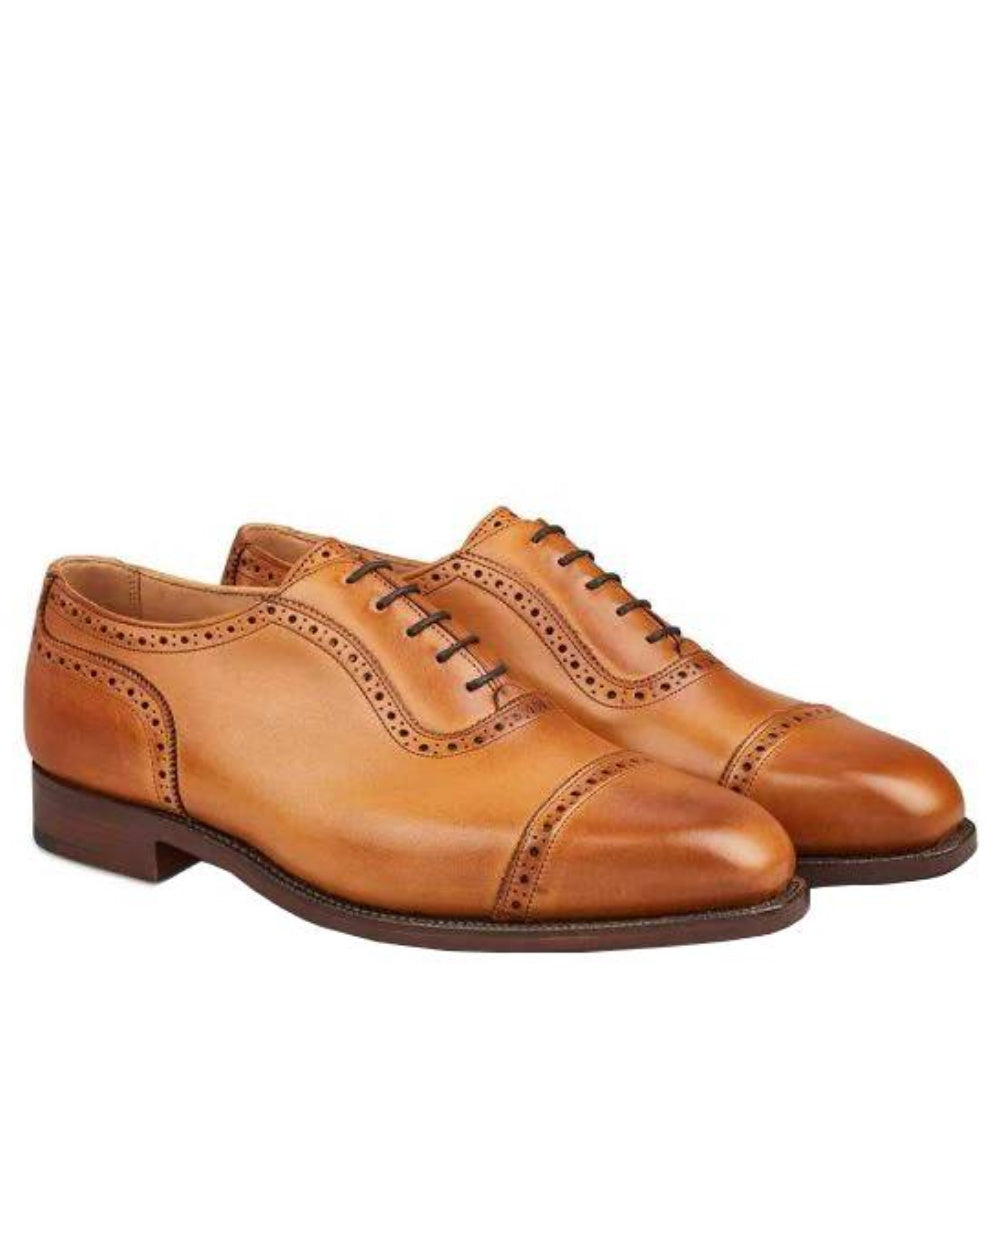 Burnished Coloured Trickers Belgrave Toecap Oxford City Shoe On A White Background 